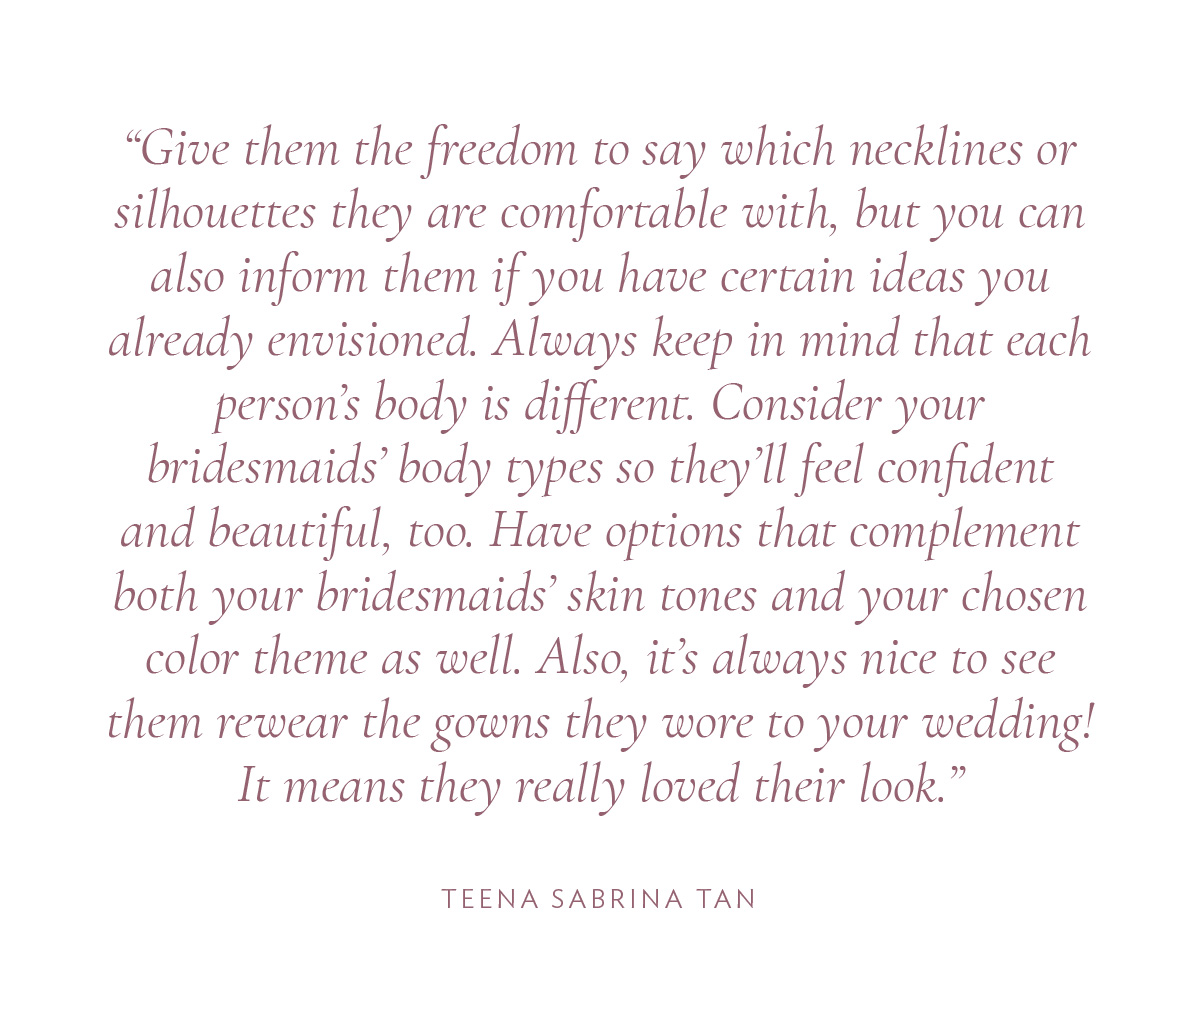 Give them the freedom to say which necklines or silhouettes they are comfortable with, but you can also inform them if you have certain ideas you already envisioned. Always keep in mind that each person’s body is different. Consider your bridesmaids’ body types so they’ll feel confident and beautiful, too. Have options that complement both your bridesmaids’ skin tones and your chosen color theme as well. Also, it’s always nice to see them rewear the gowns they wore to your wedding! It means they really loved their look.